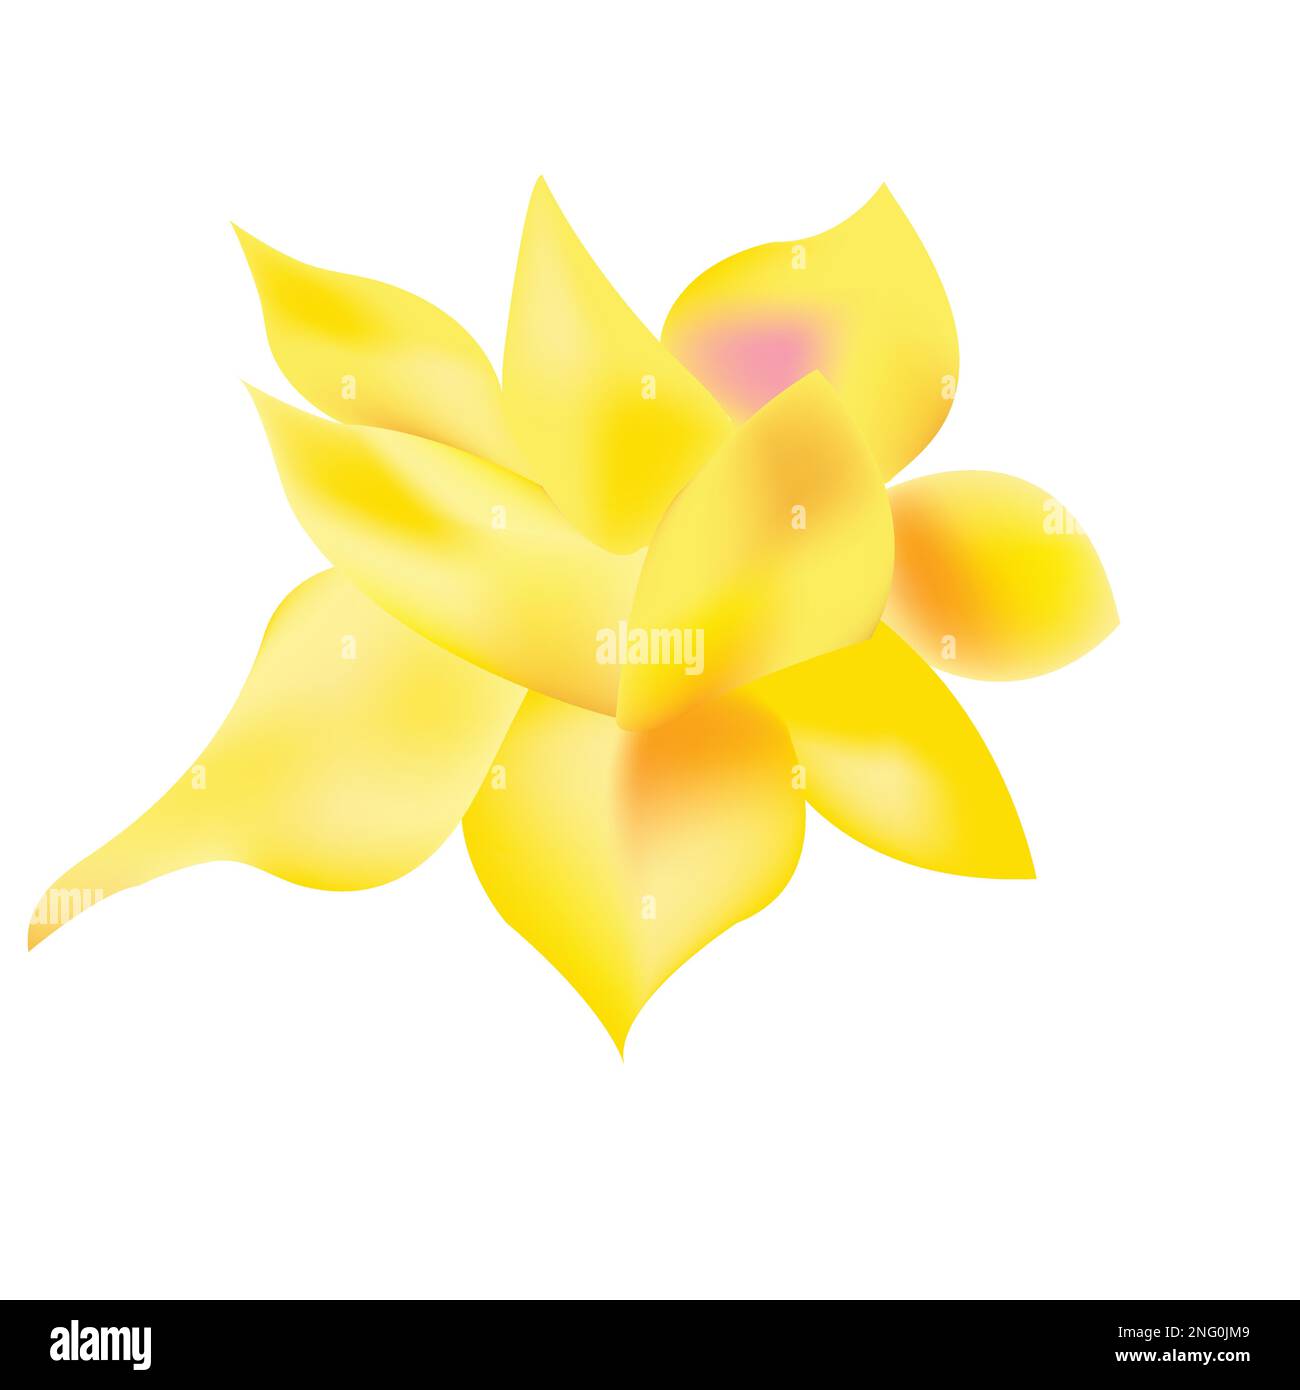 Daffodil flower made with mesh over white background Stock Vector